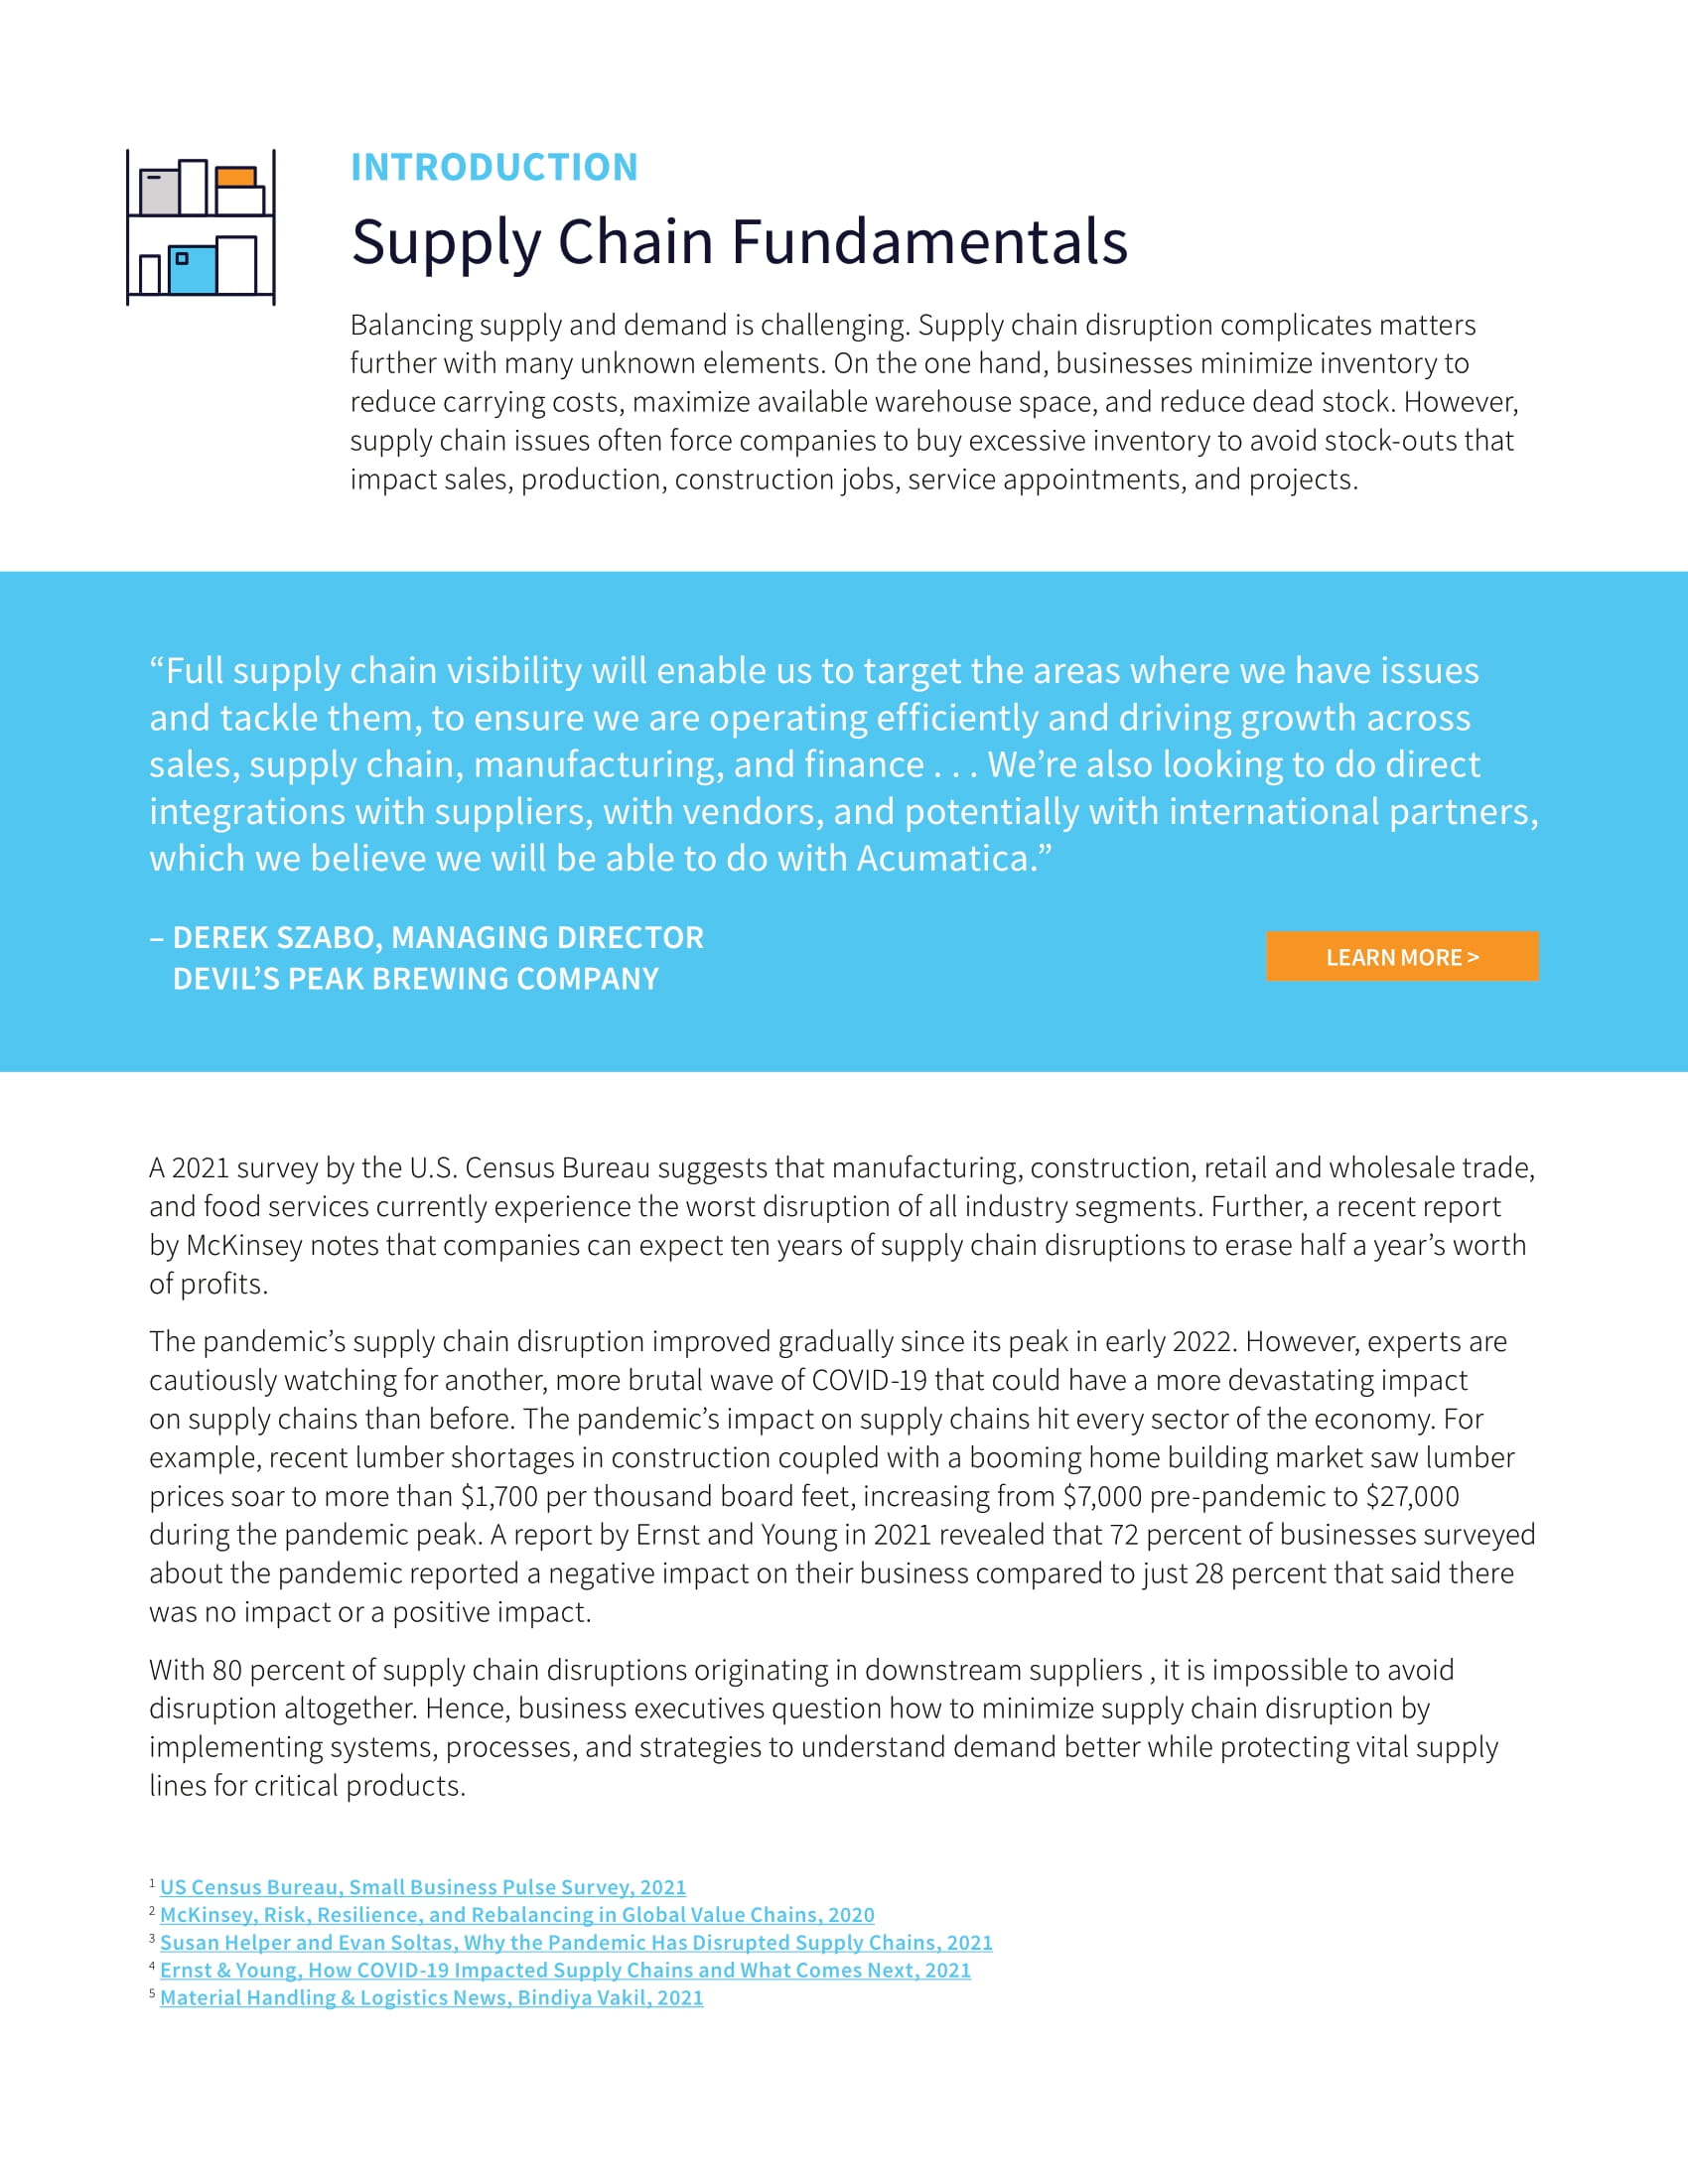 13 Strategies To Overcome Supply Chain Disruptions, page 1